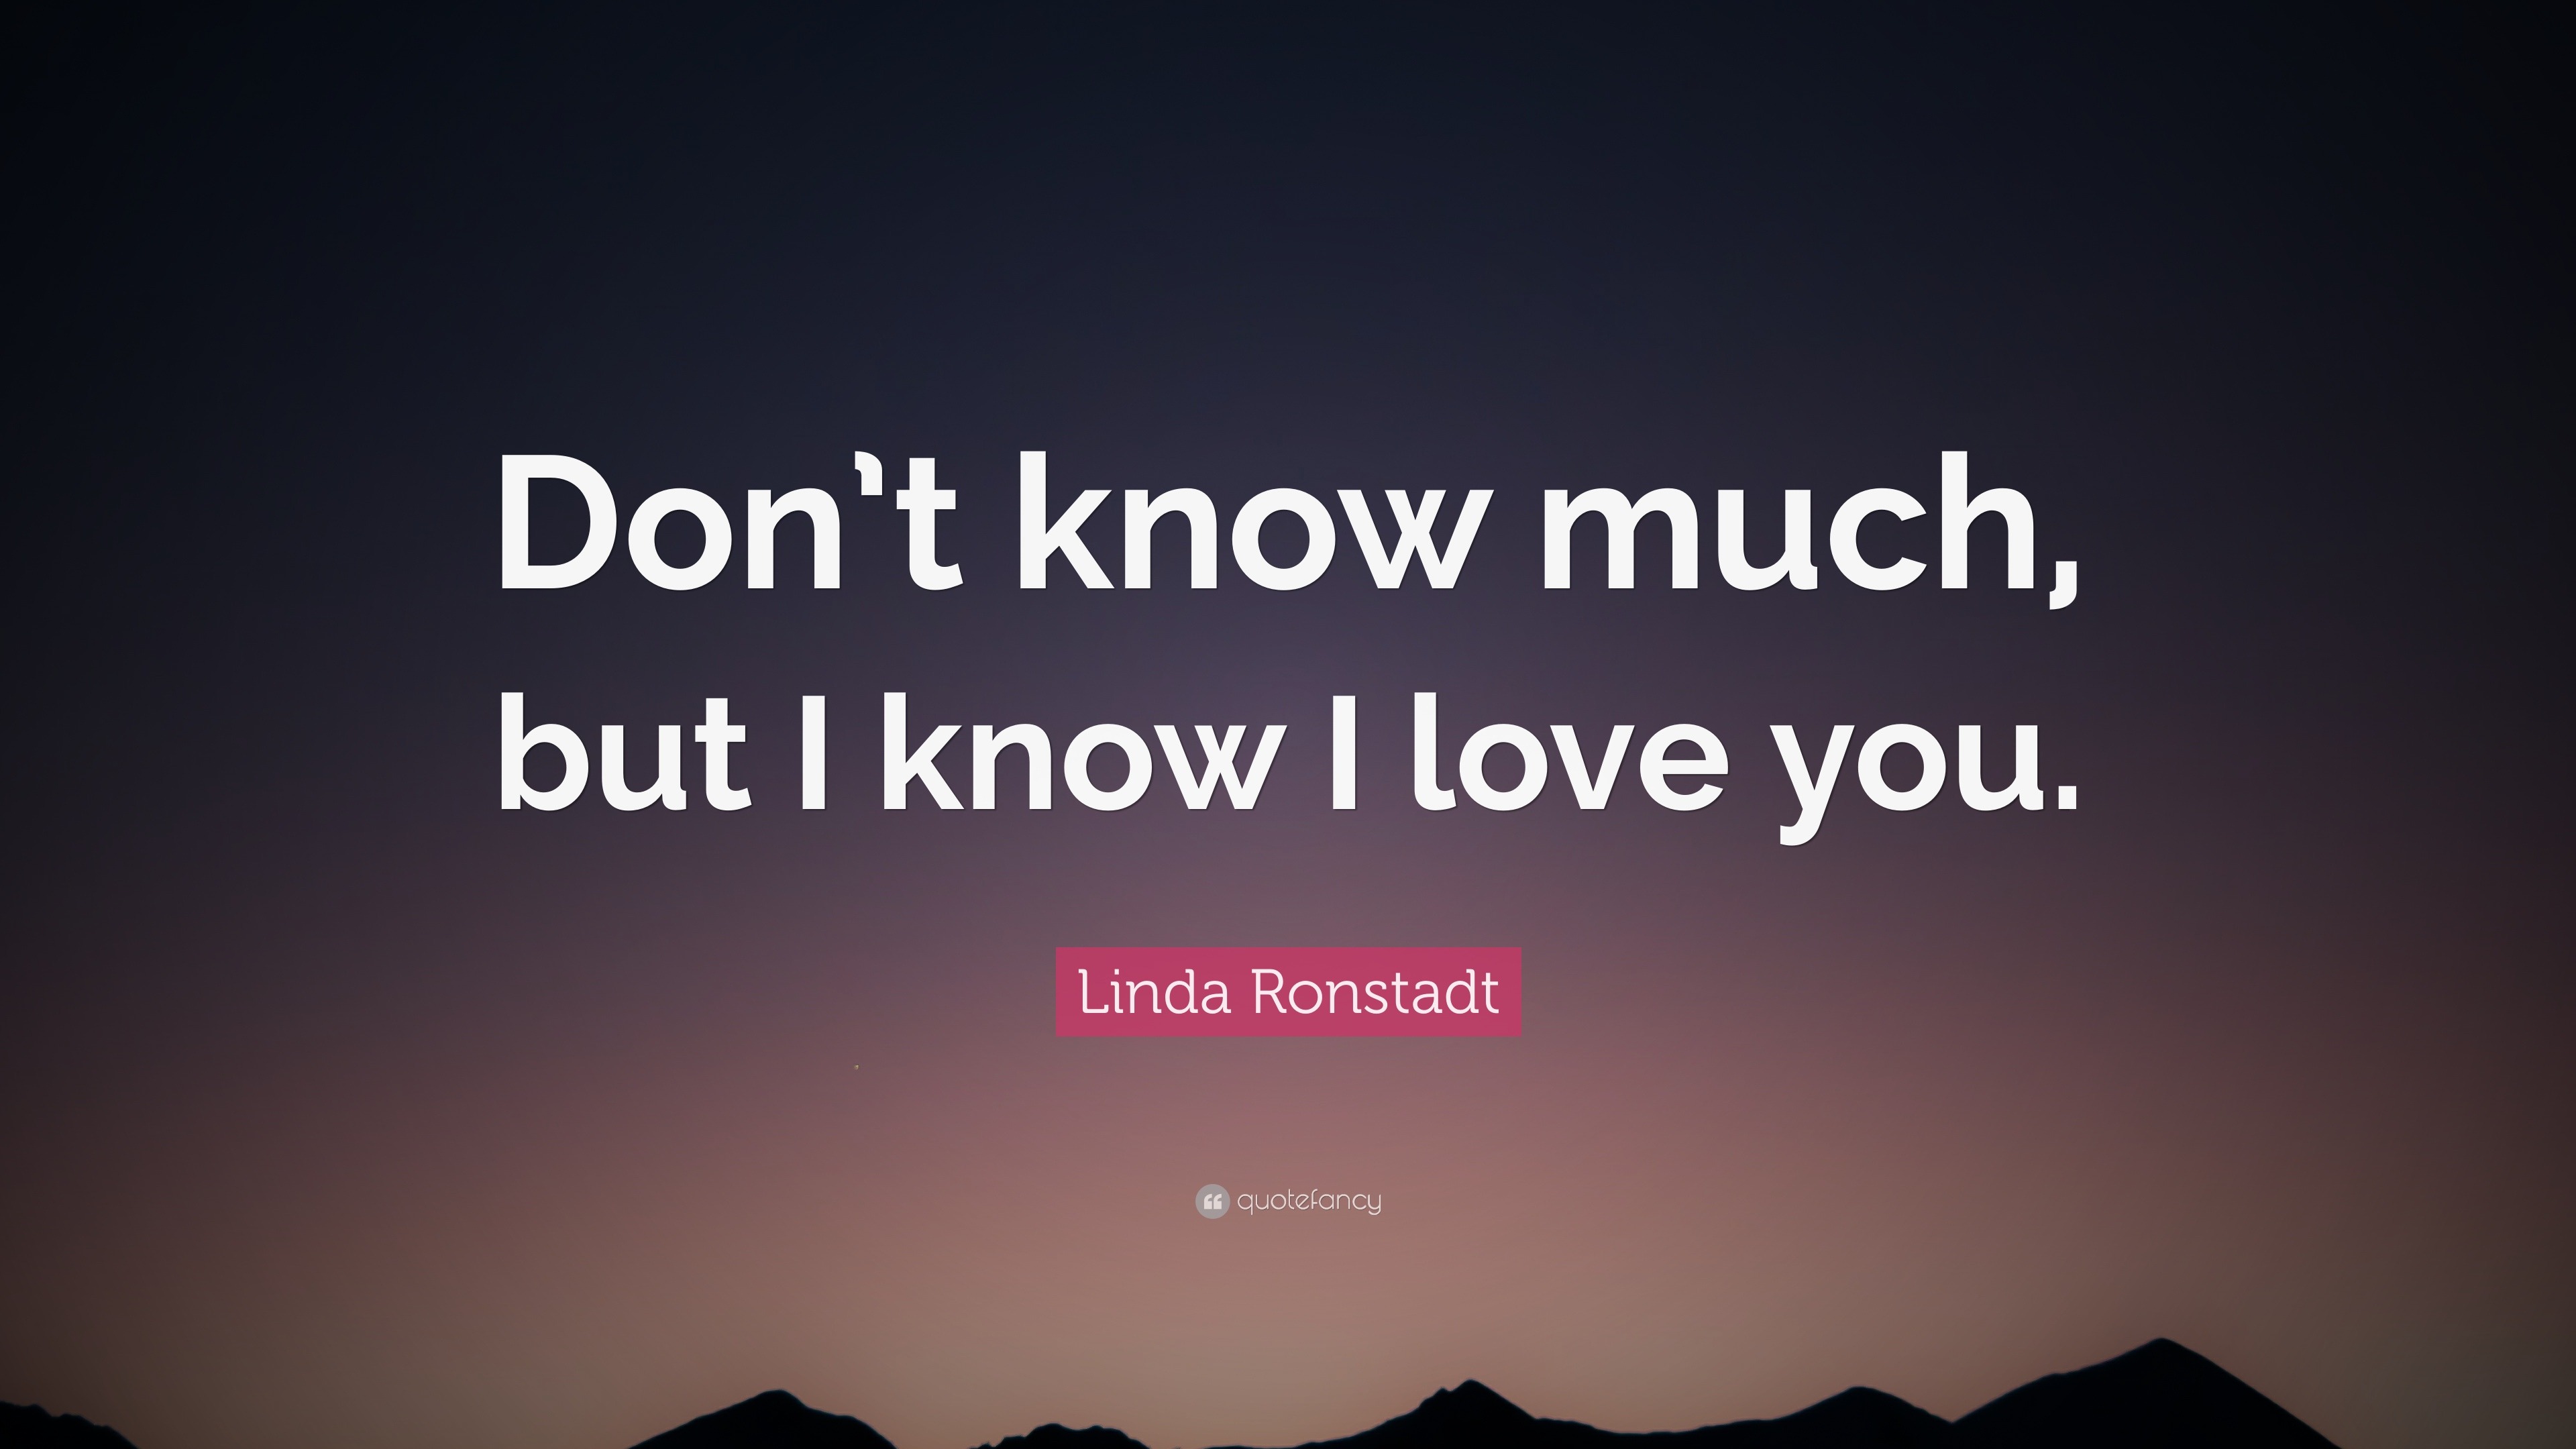 Linda Ronstadt Quote “Don t know much but I know I love